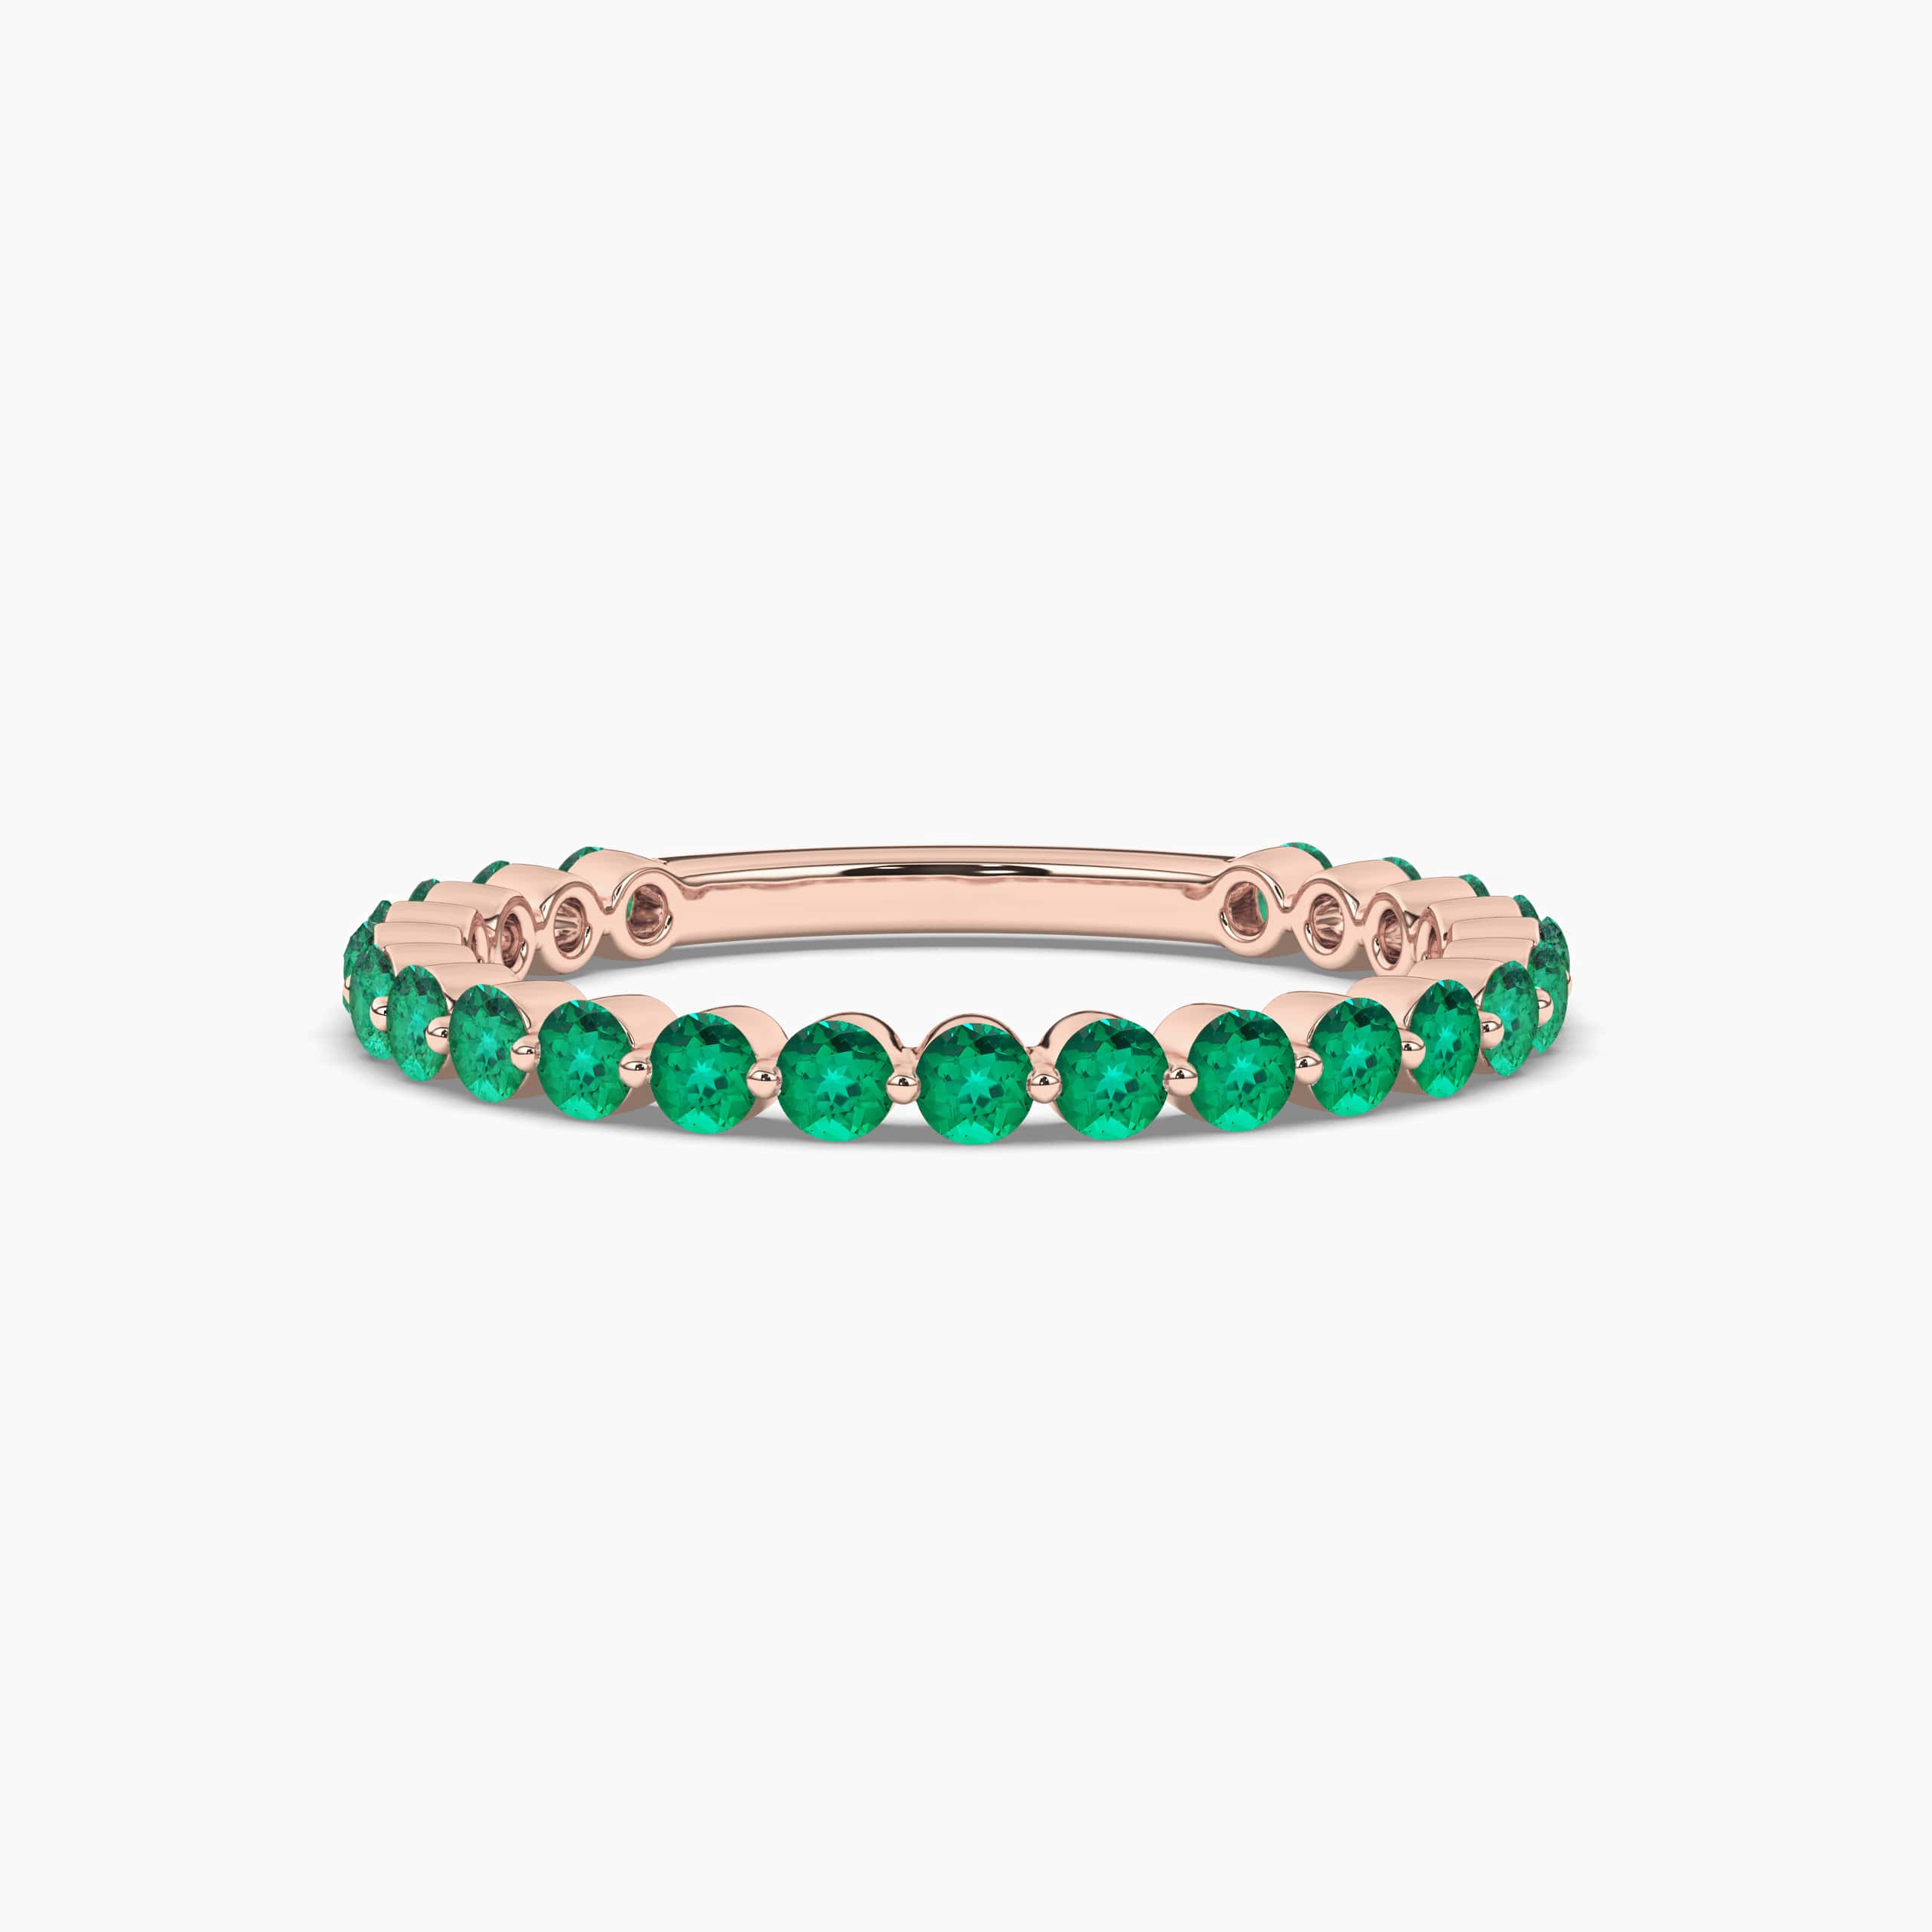 GREEN EMERALD ETERNITY BAND RING IN ROSE GOLD